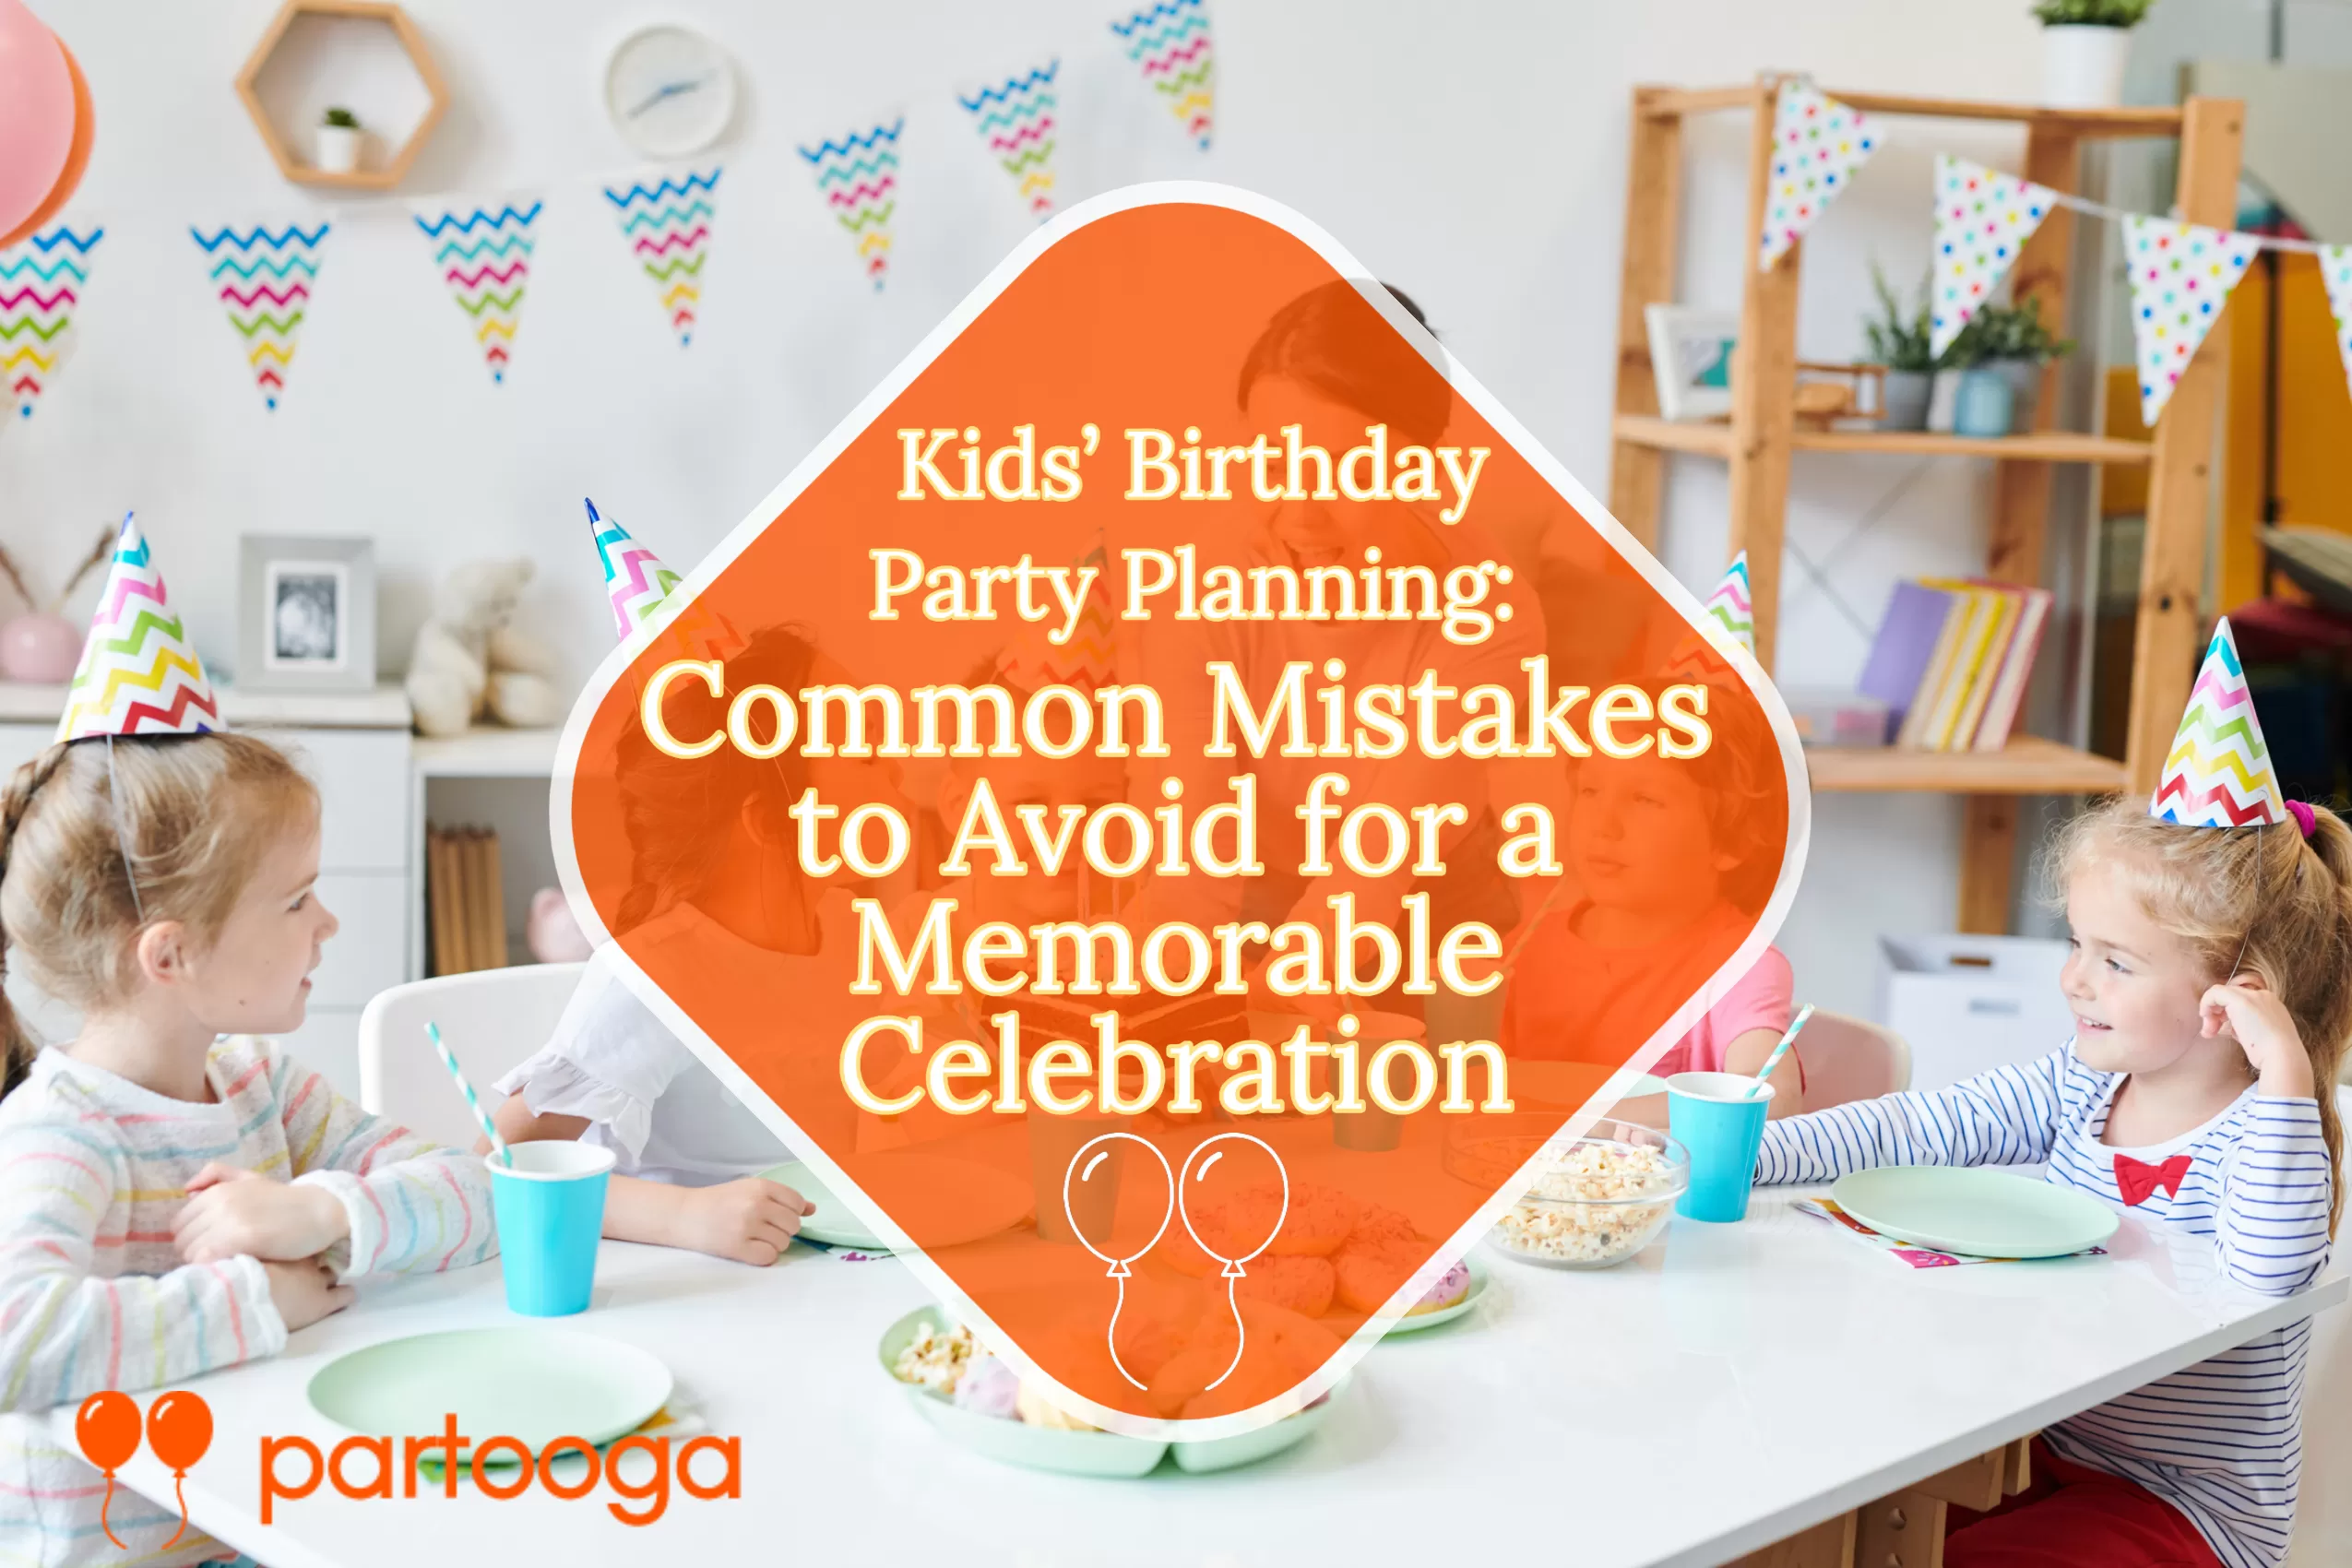 Kids’ Birthday Party Planning: Common Mistakes to Avoid for a Memorable Celebration